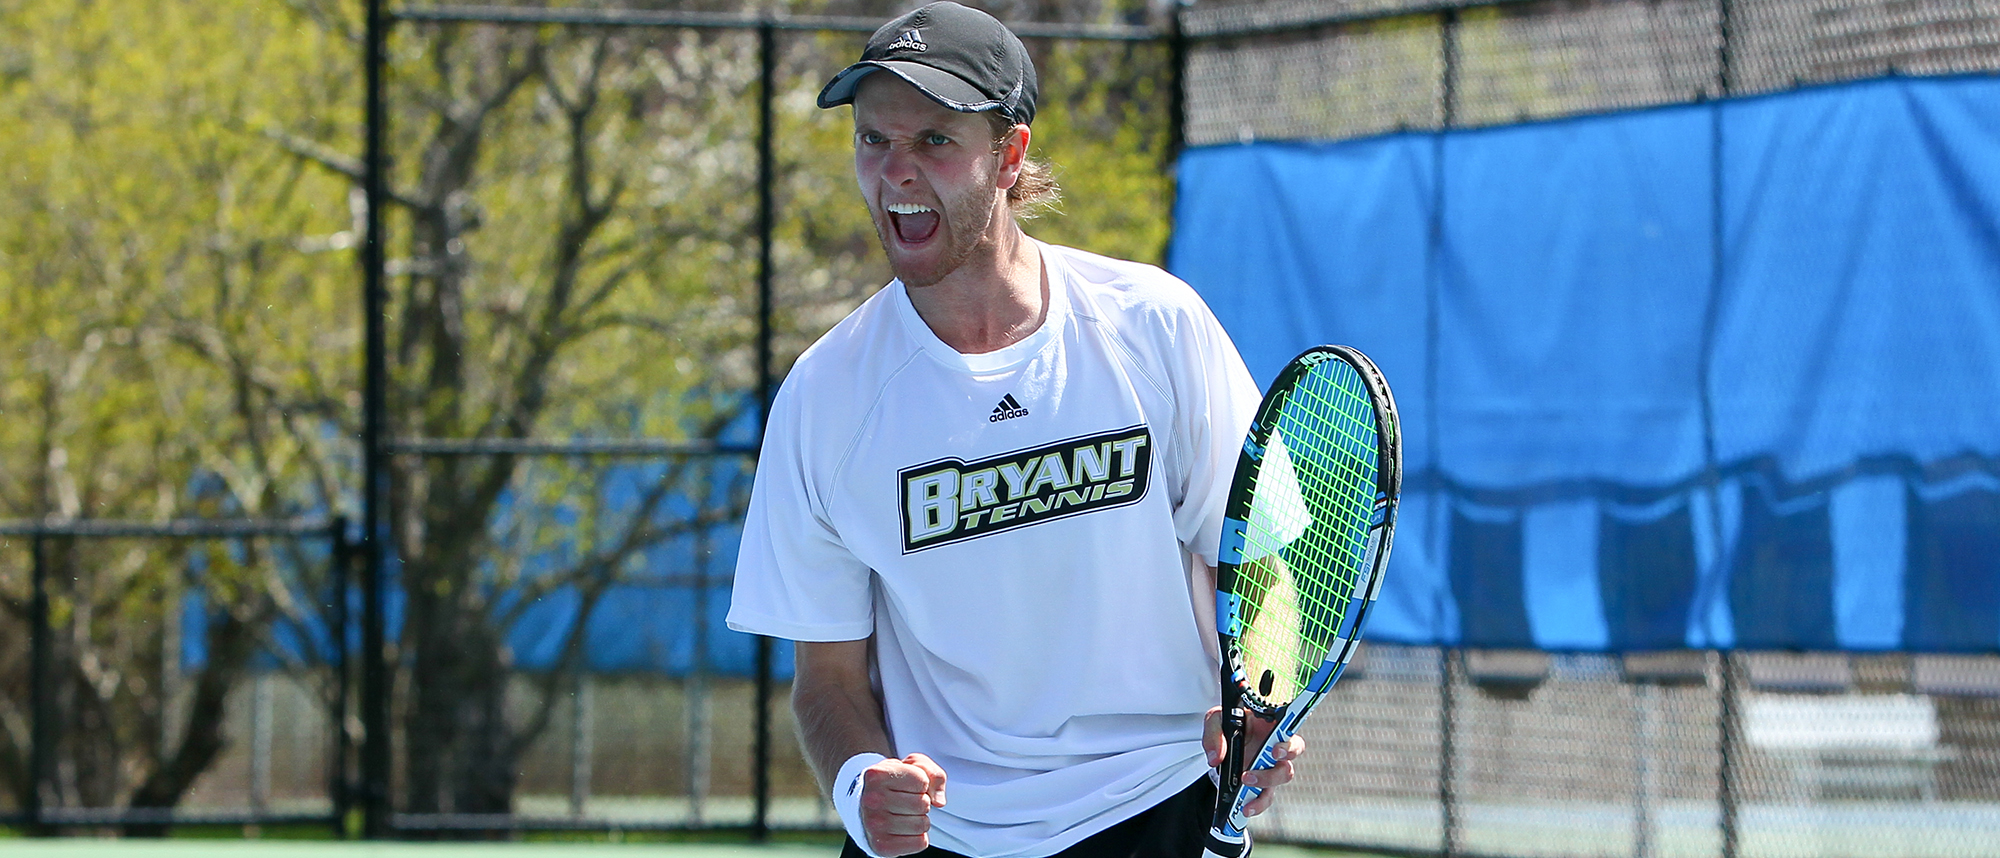 Bryant captures fifth-straight NEC Men's Commissioner's Cup